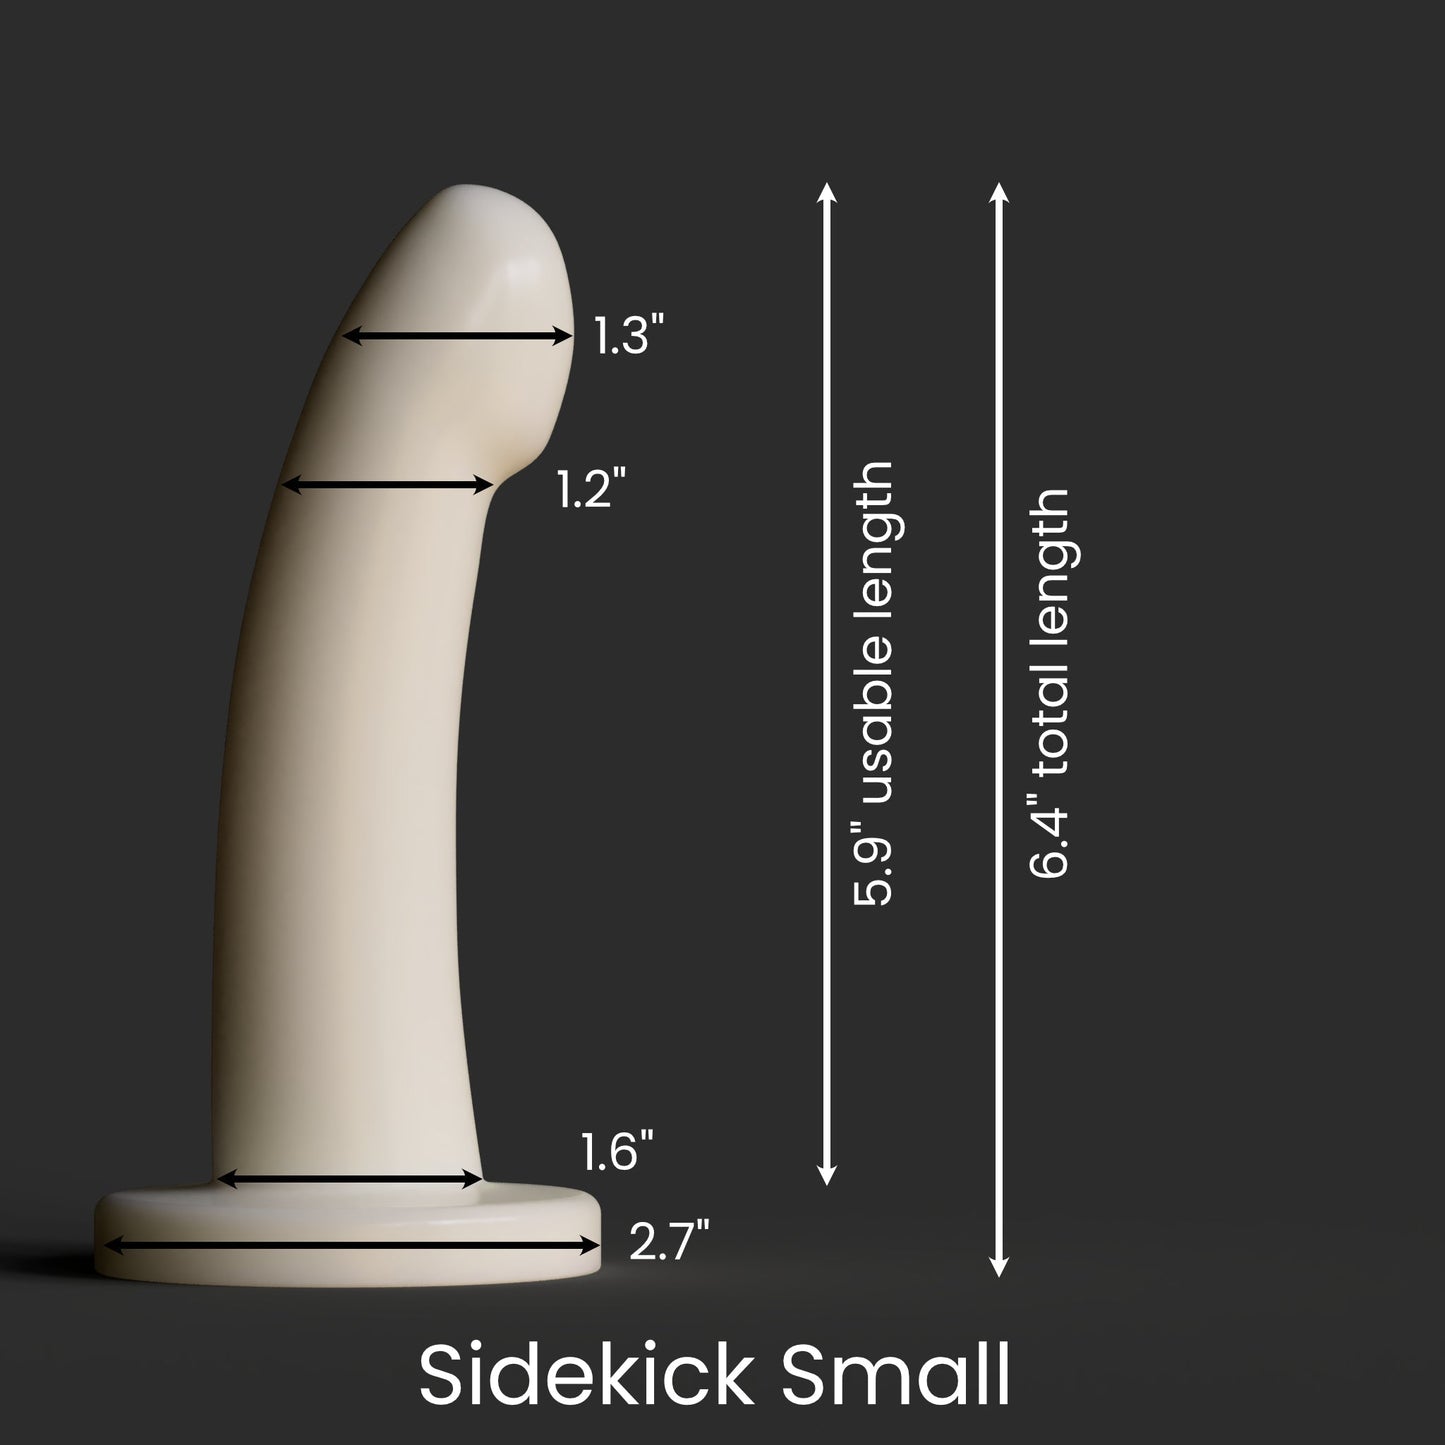 Diagram showing the dimensions of the Sidekick S as described in the product description.